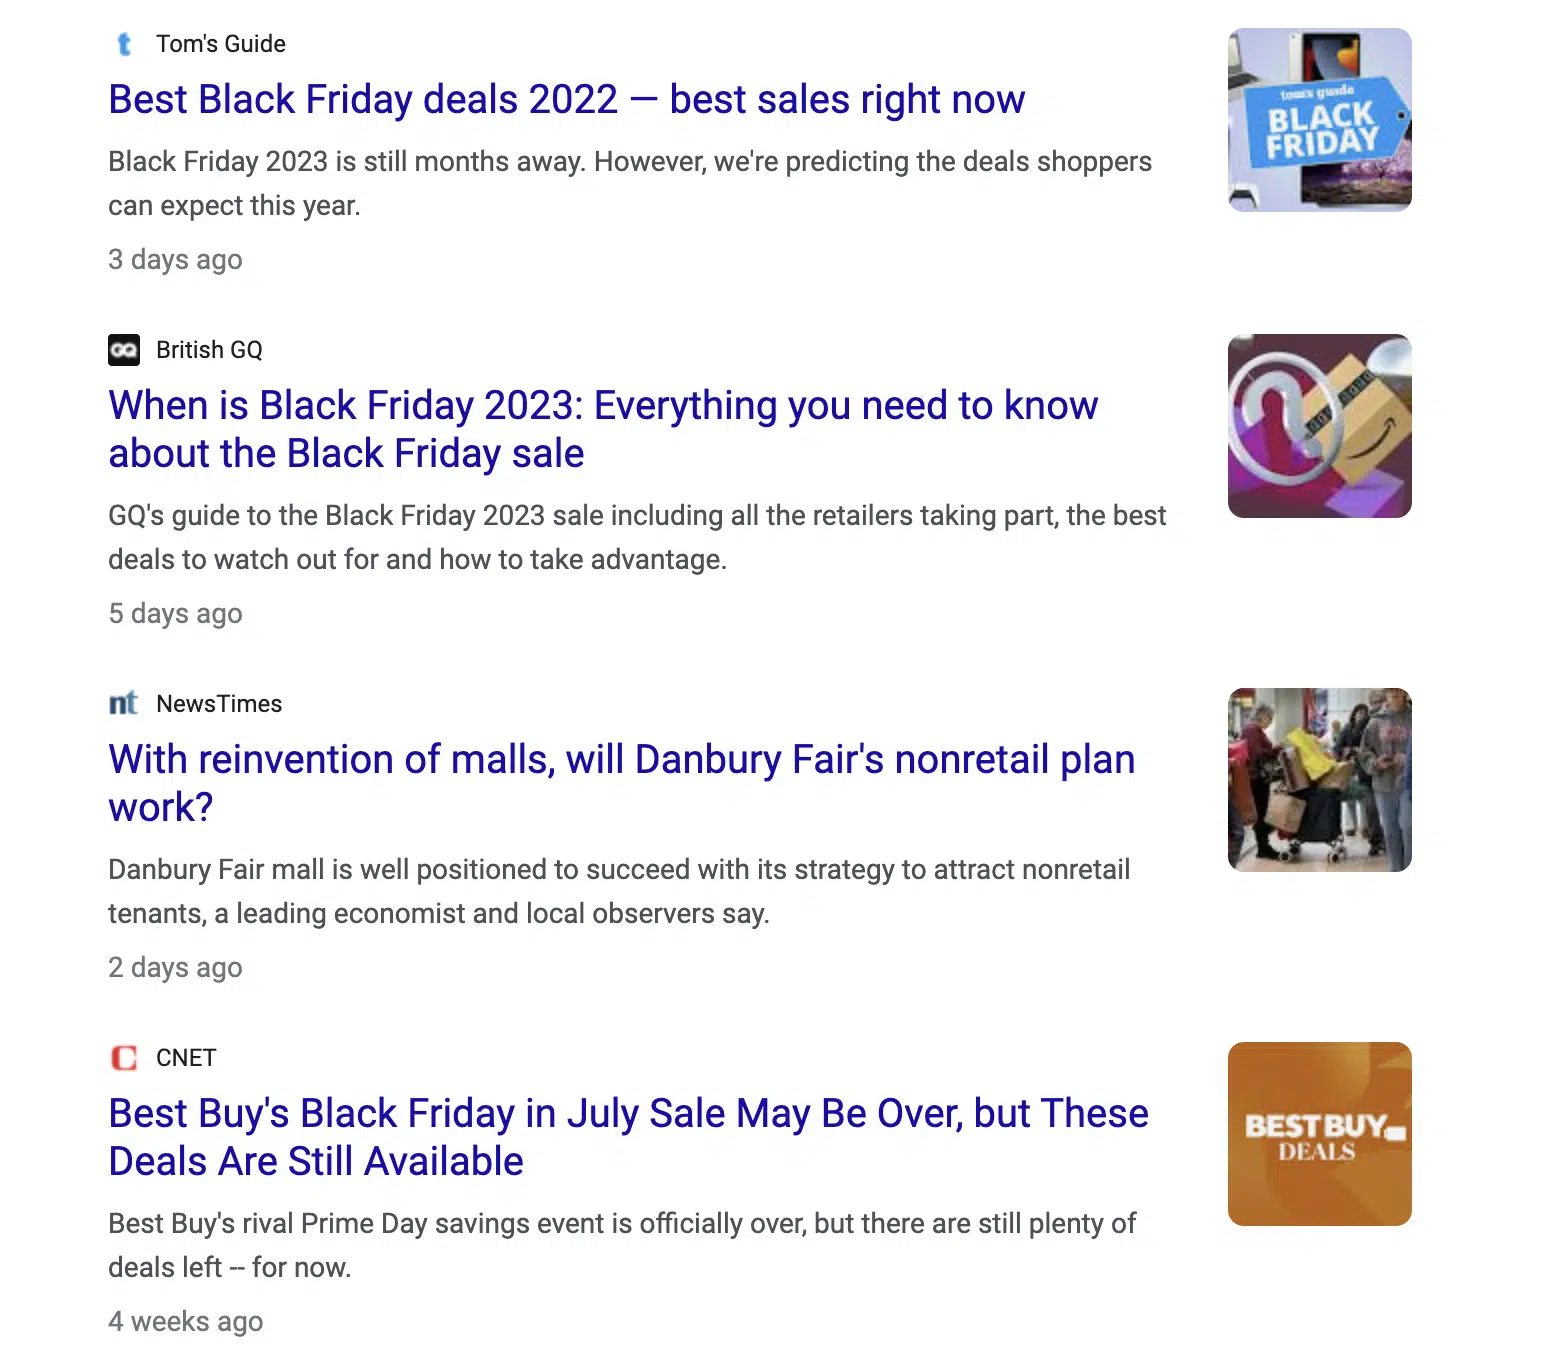 Google news results for “black friday” search in August 2023 in the US